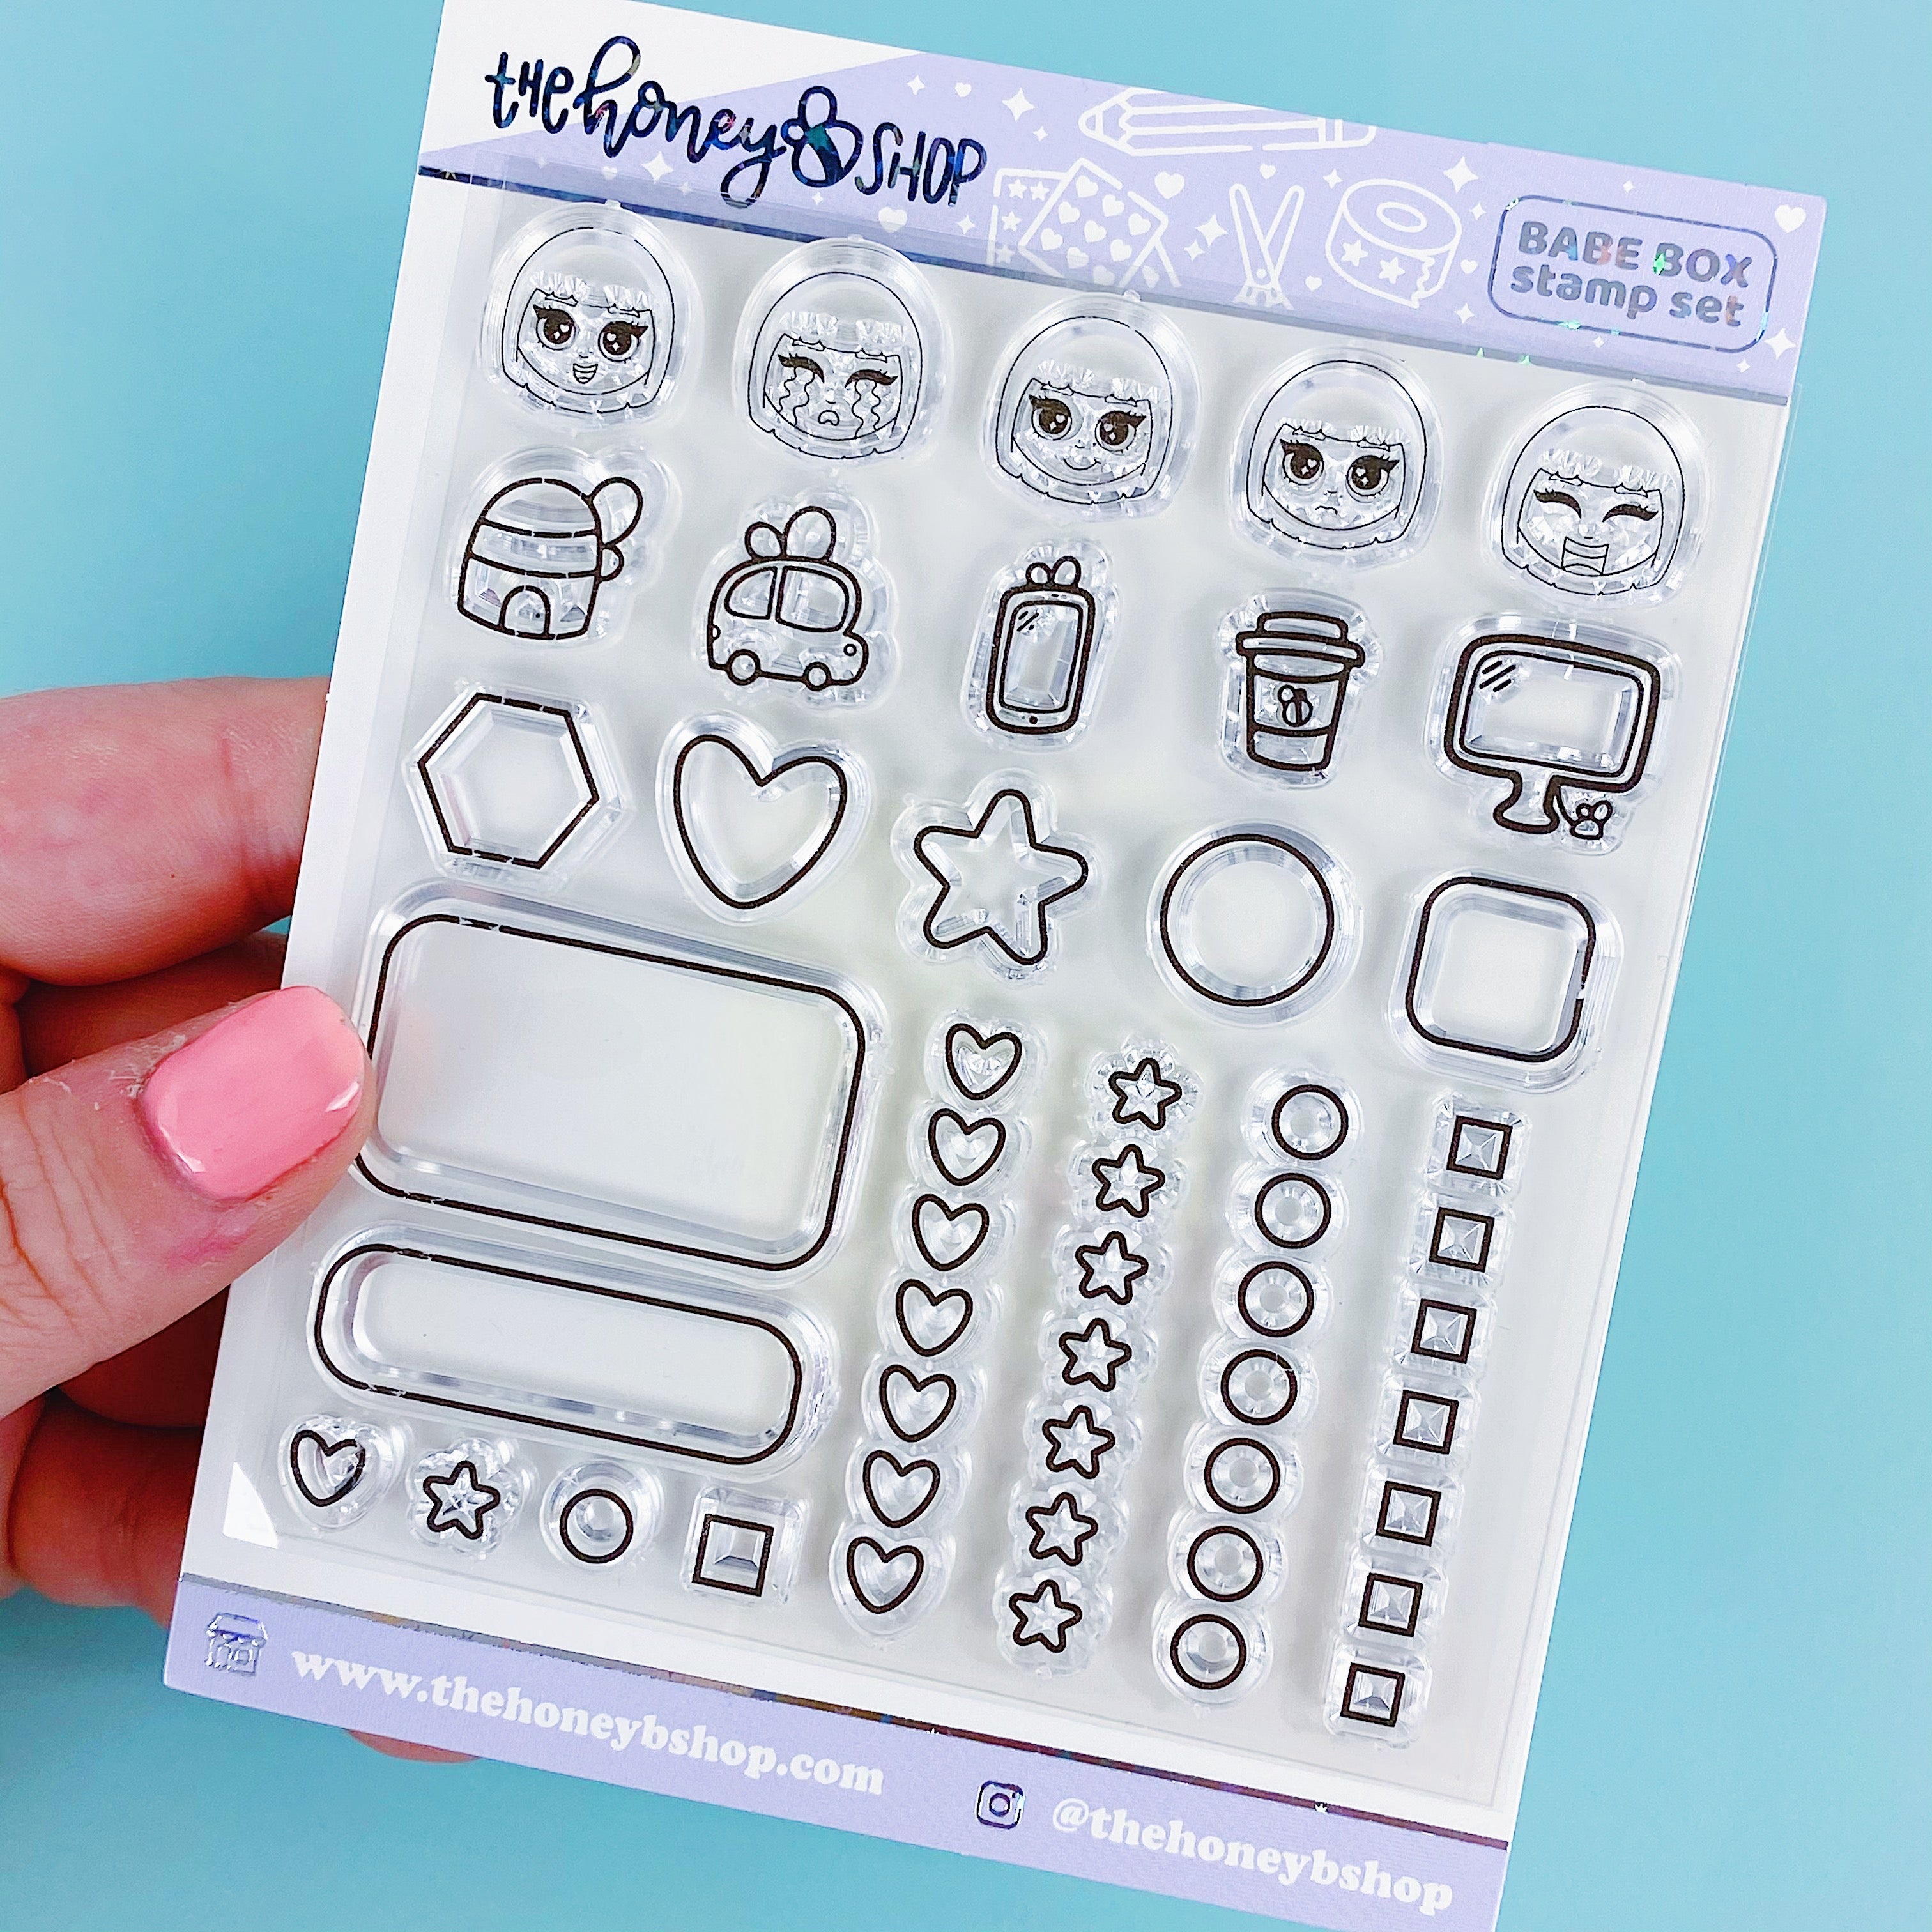 STAMPS, STENCILS + RULERS – TheHoneyBShop